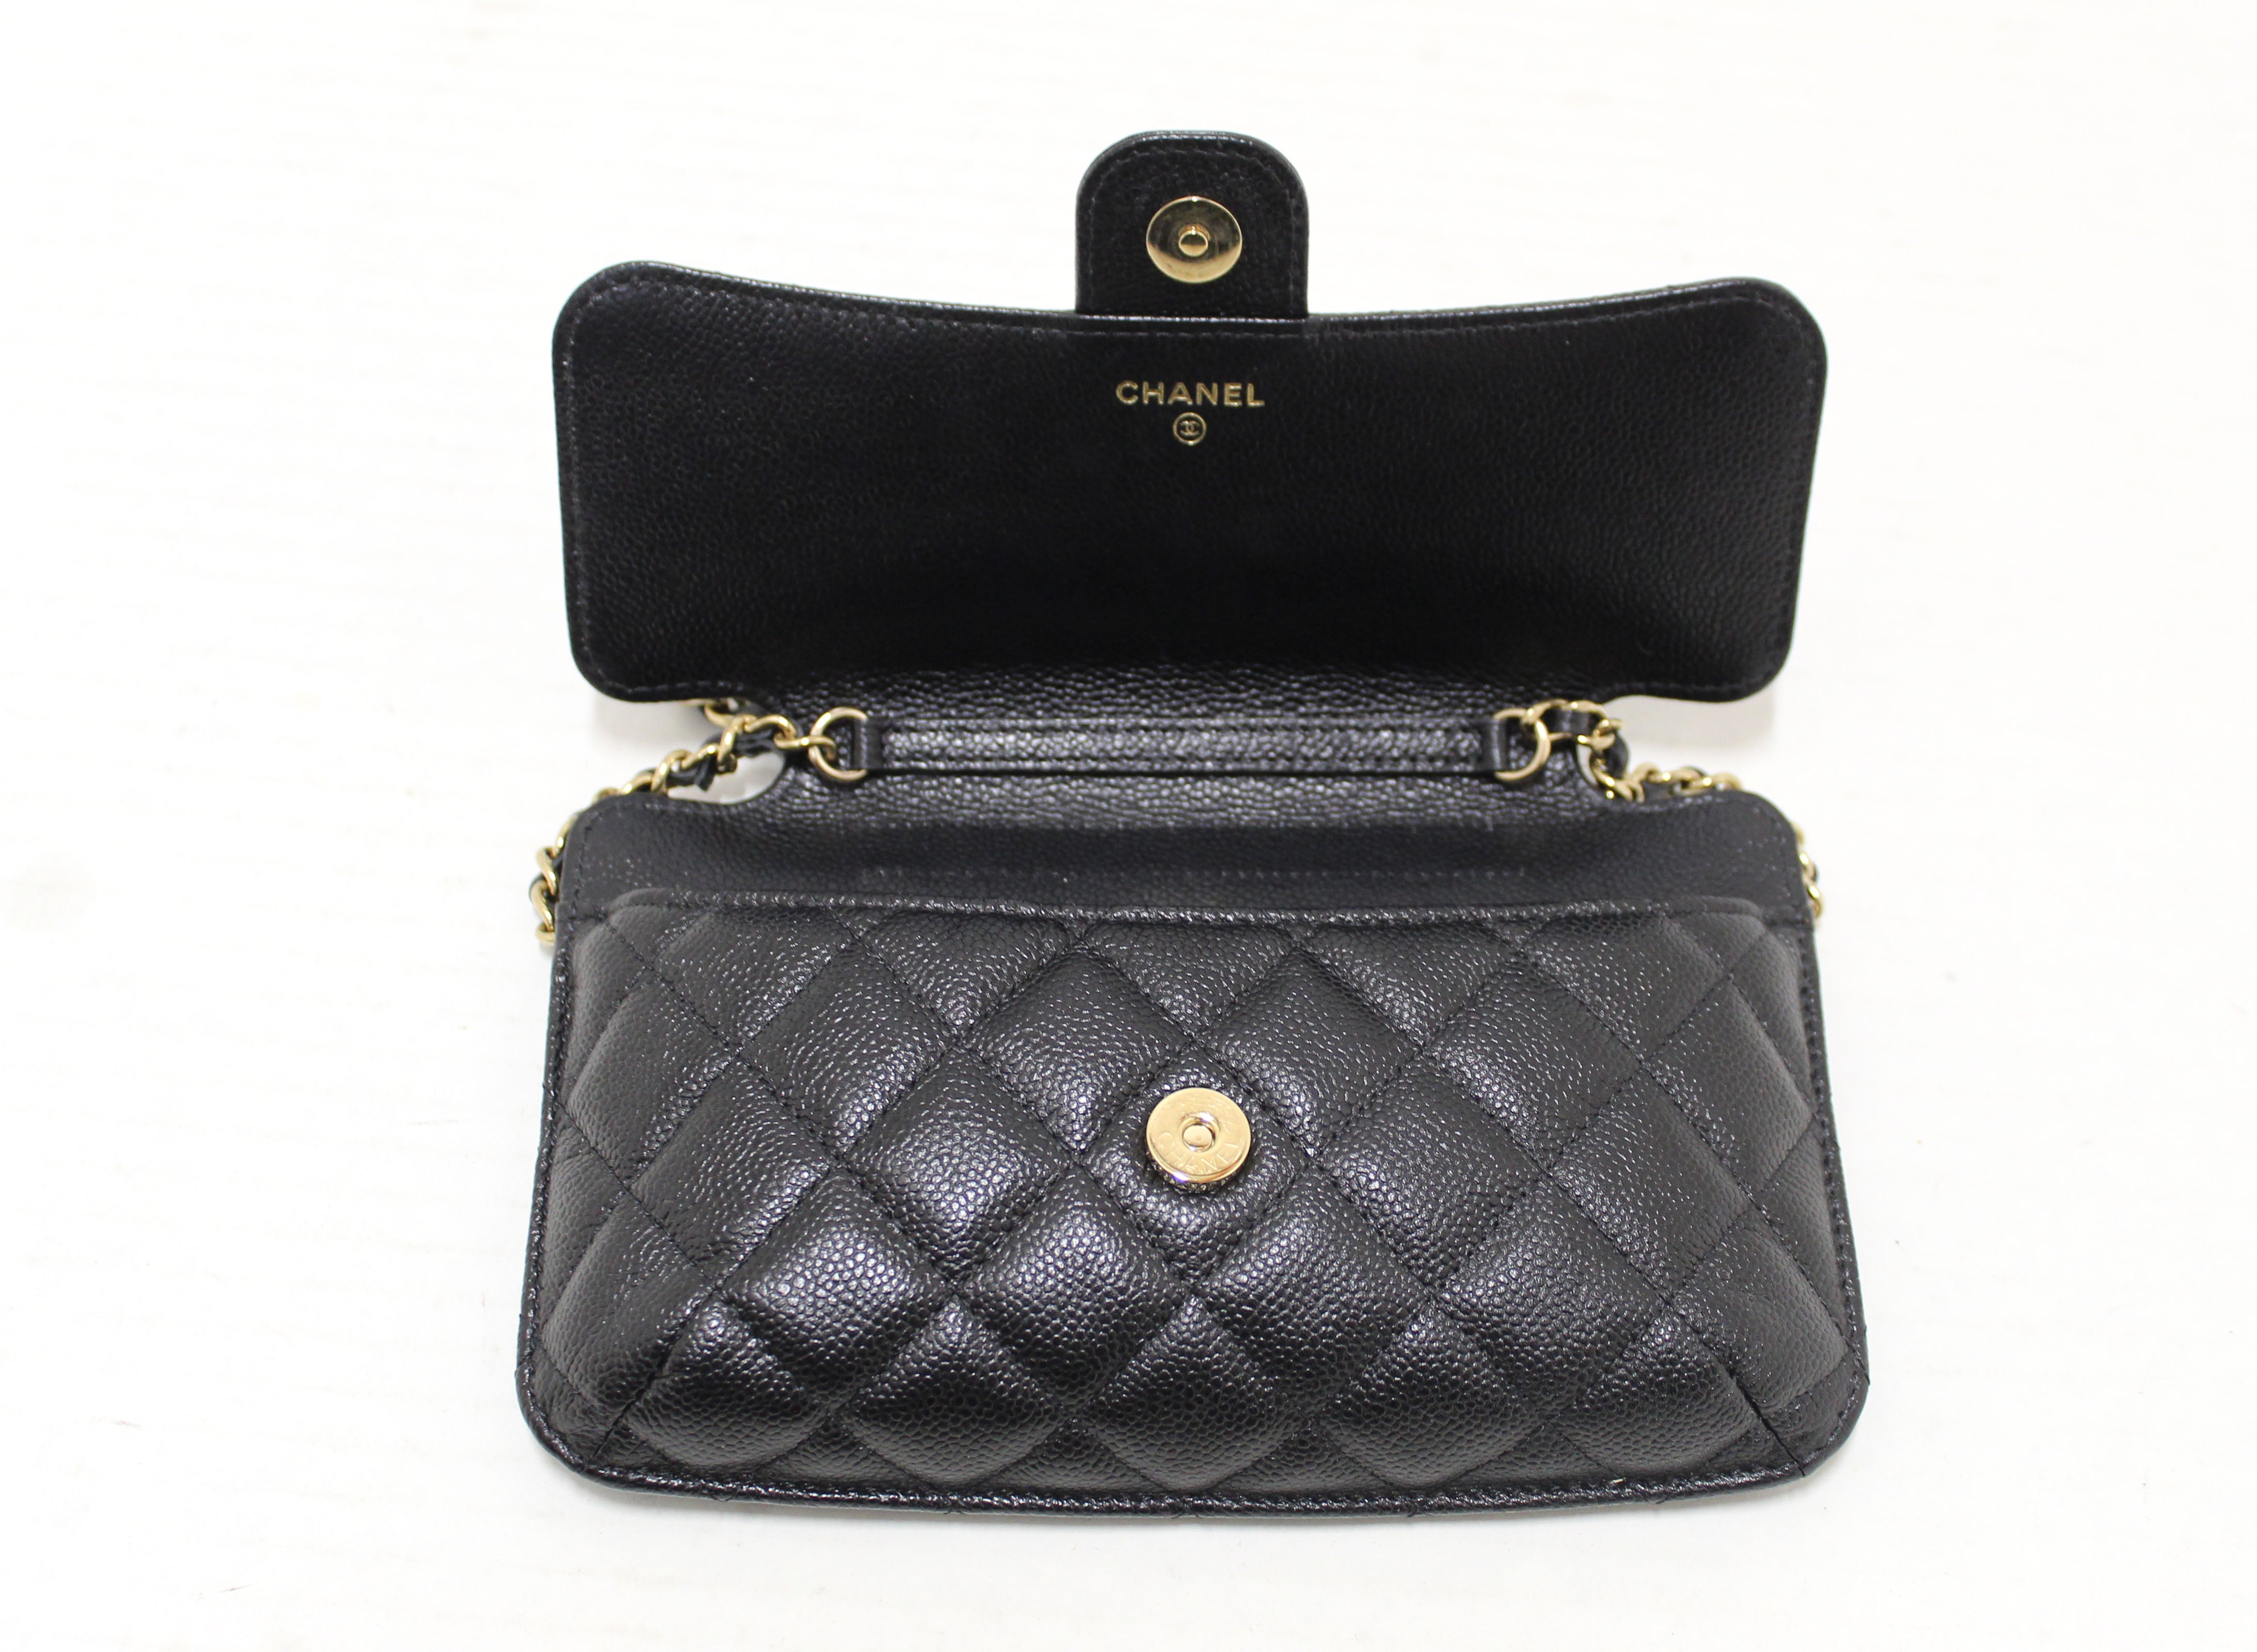 Chanel Wallet on Chain in Black Caviar - Preowned - The Consignment Cafe